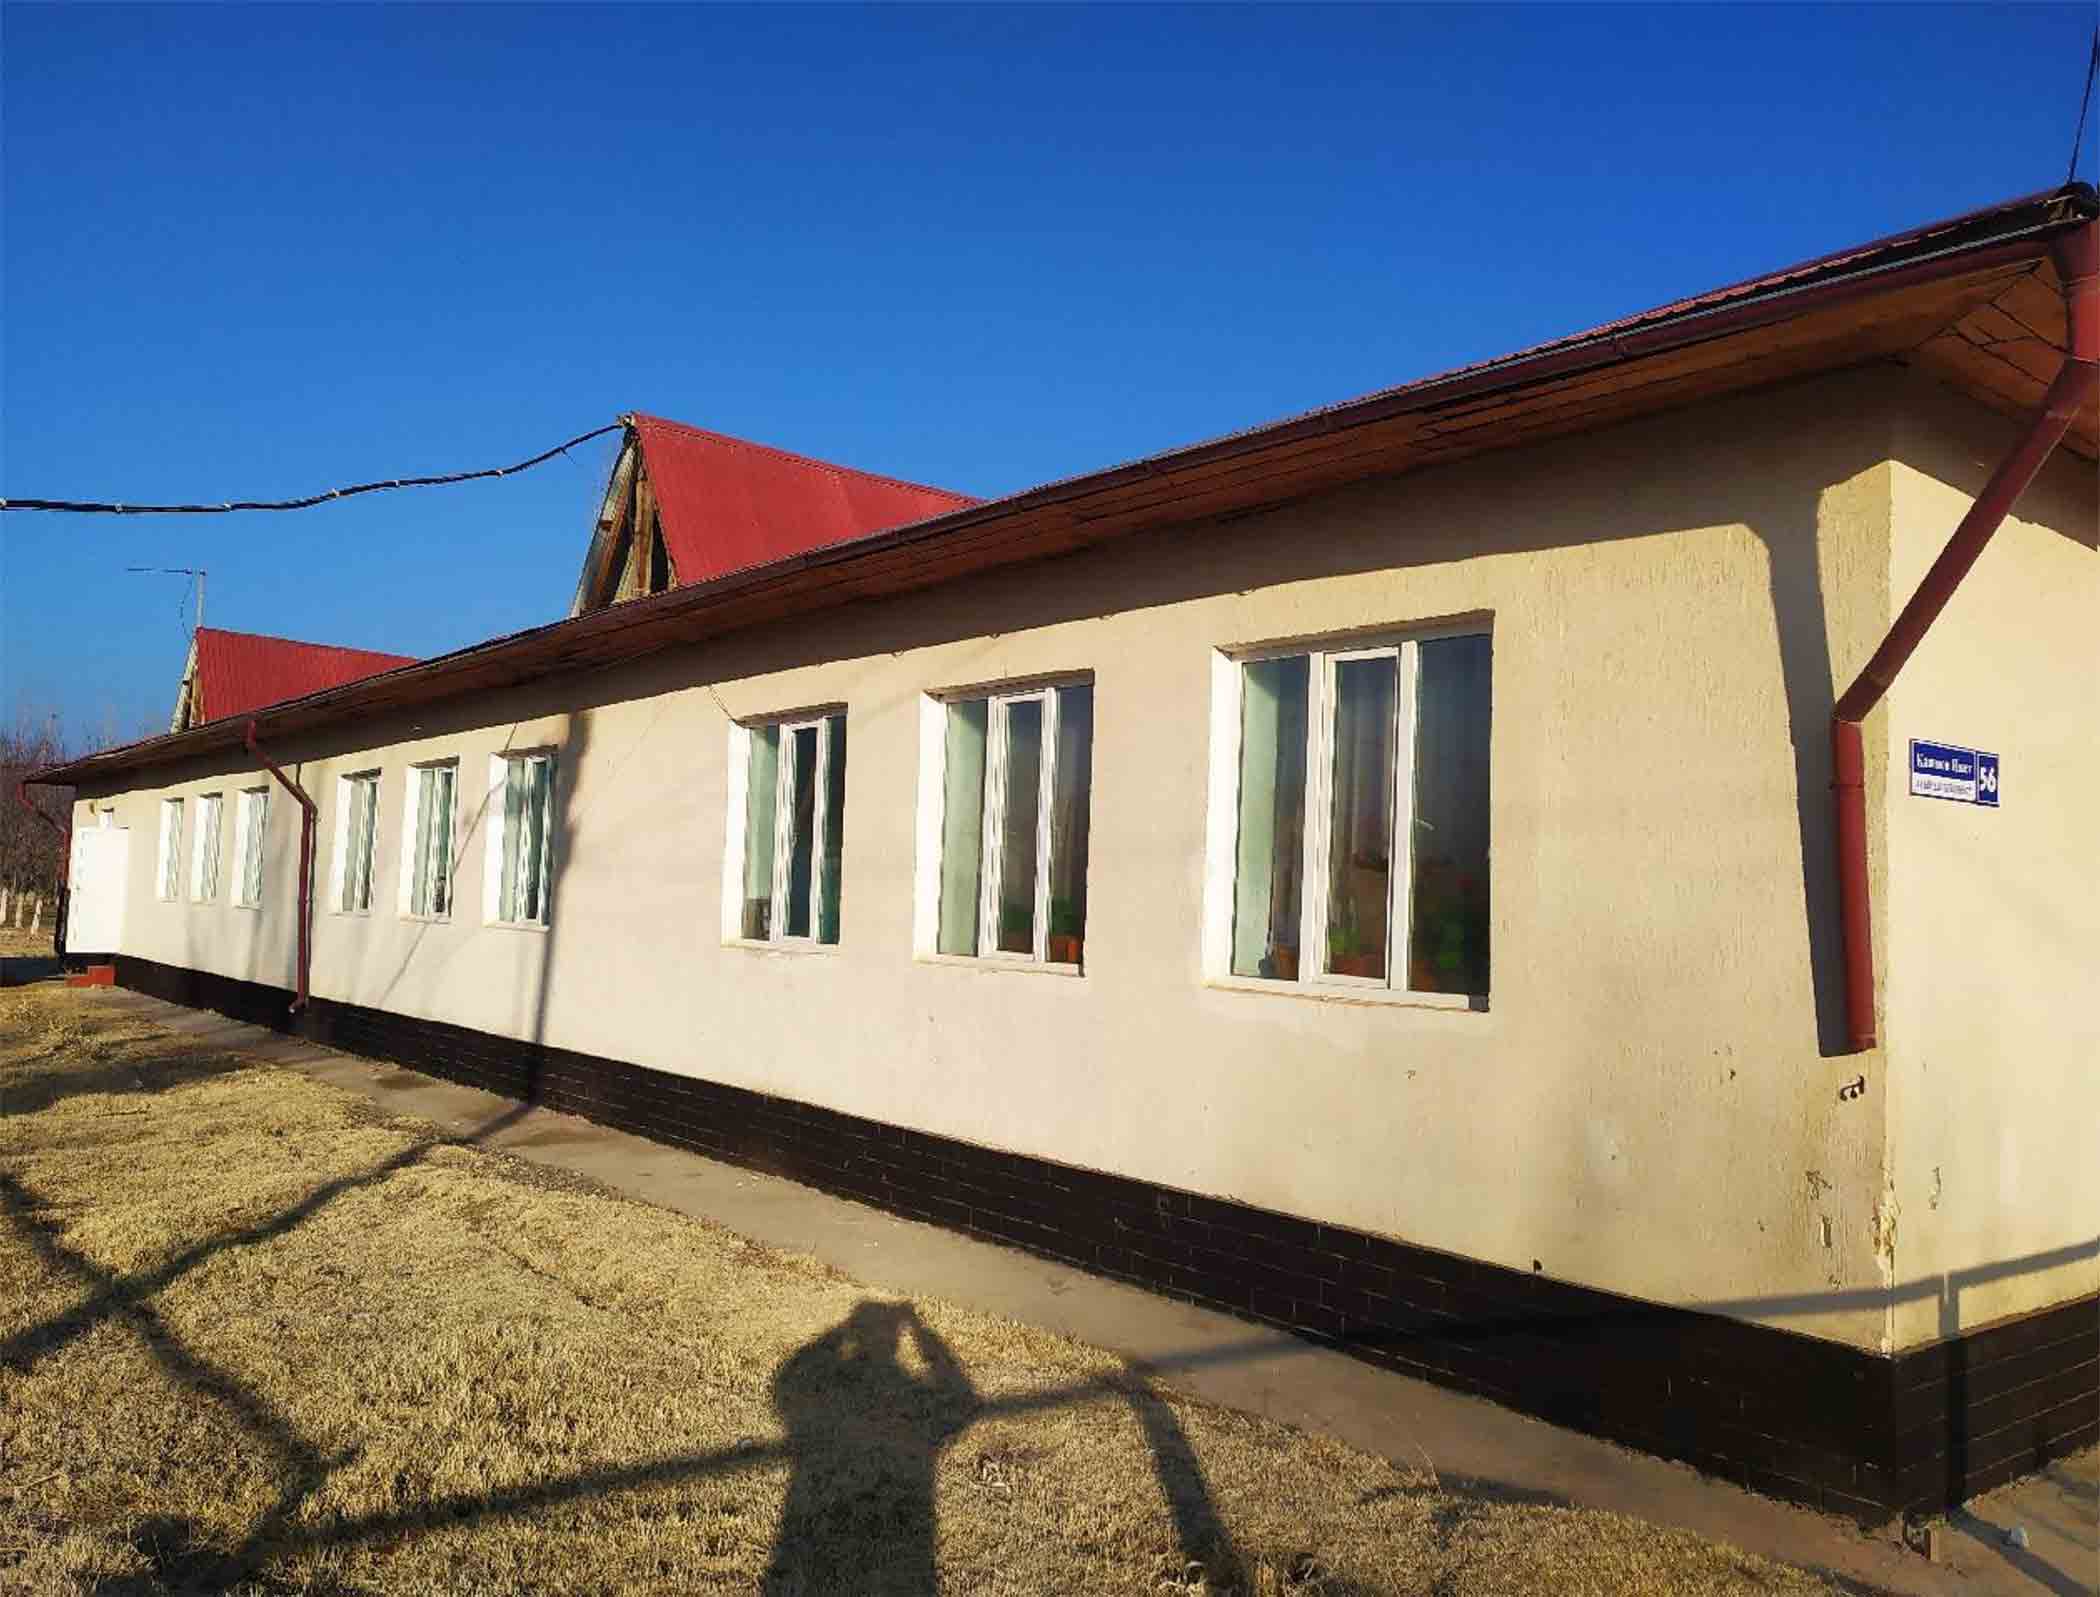 An official takes a photo of an undamaged school in the Kyrgyz Republic